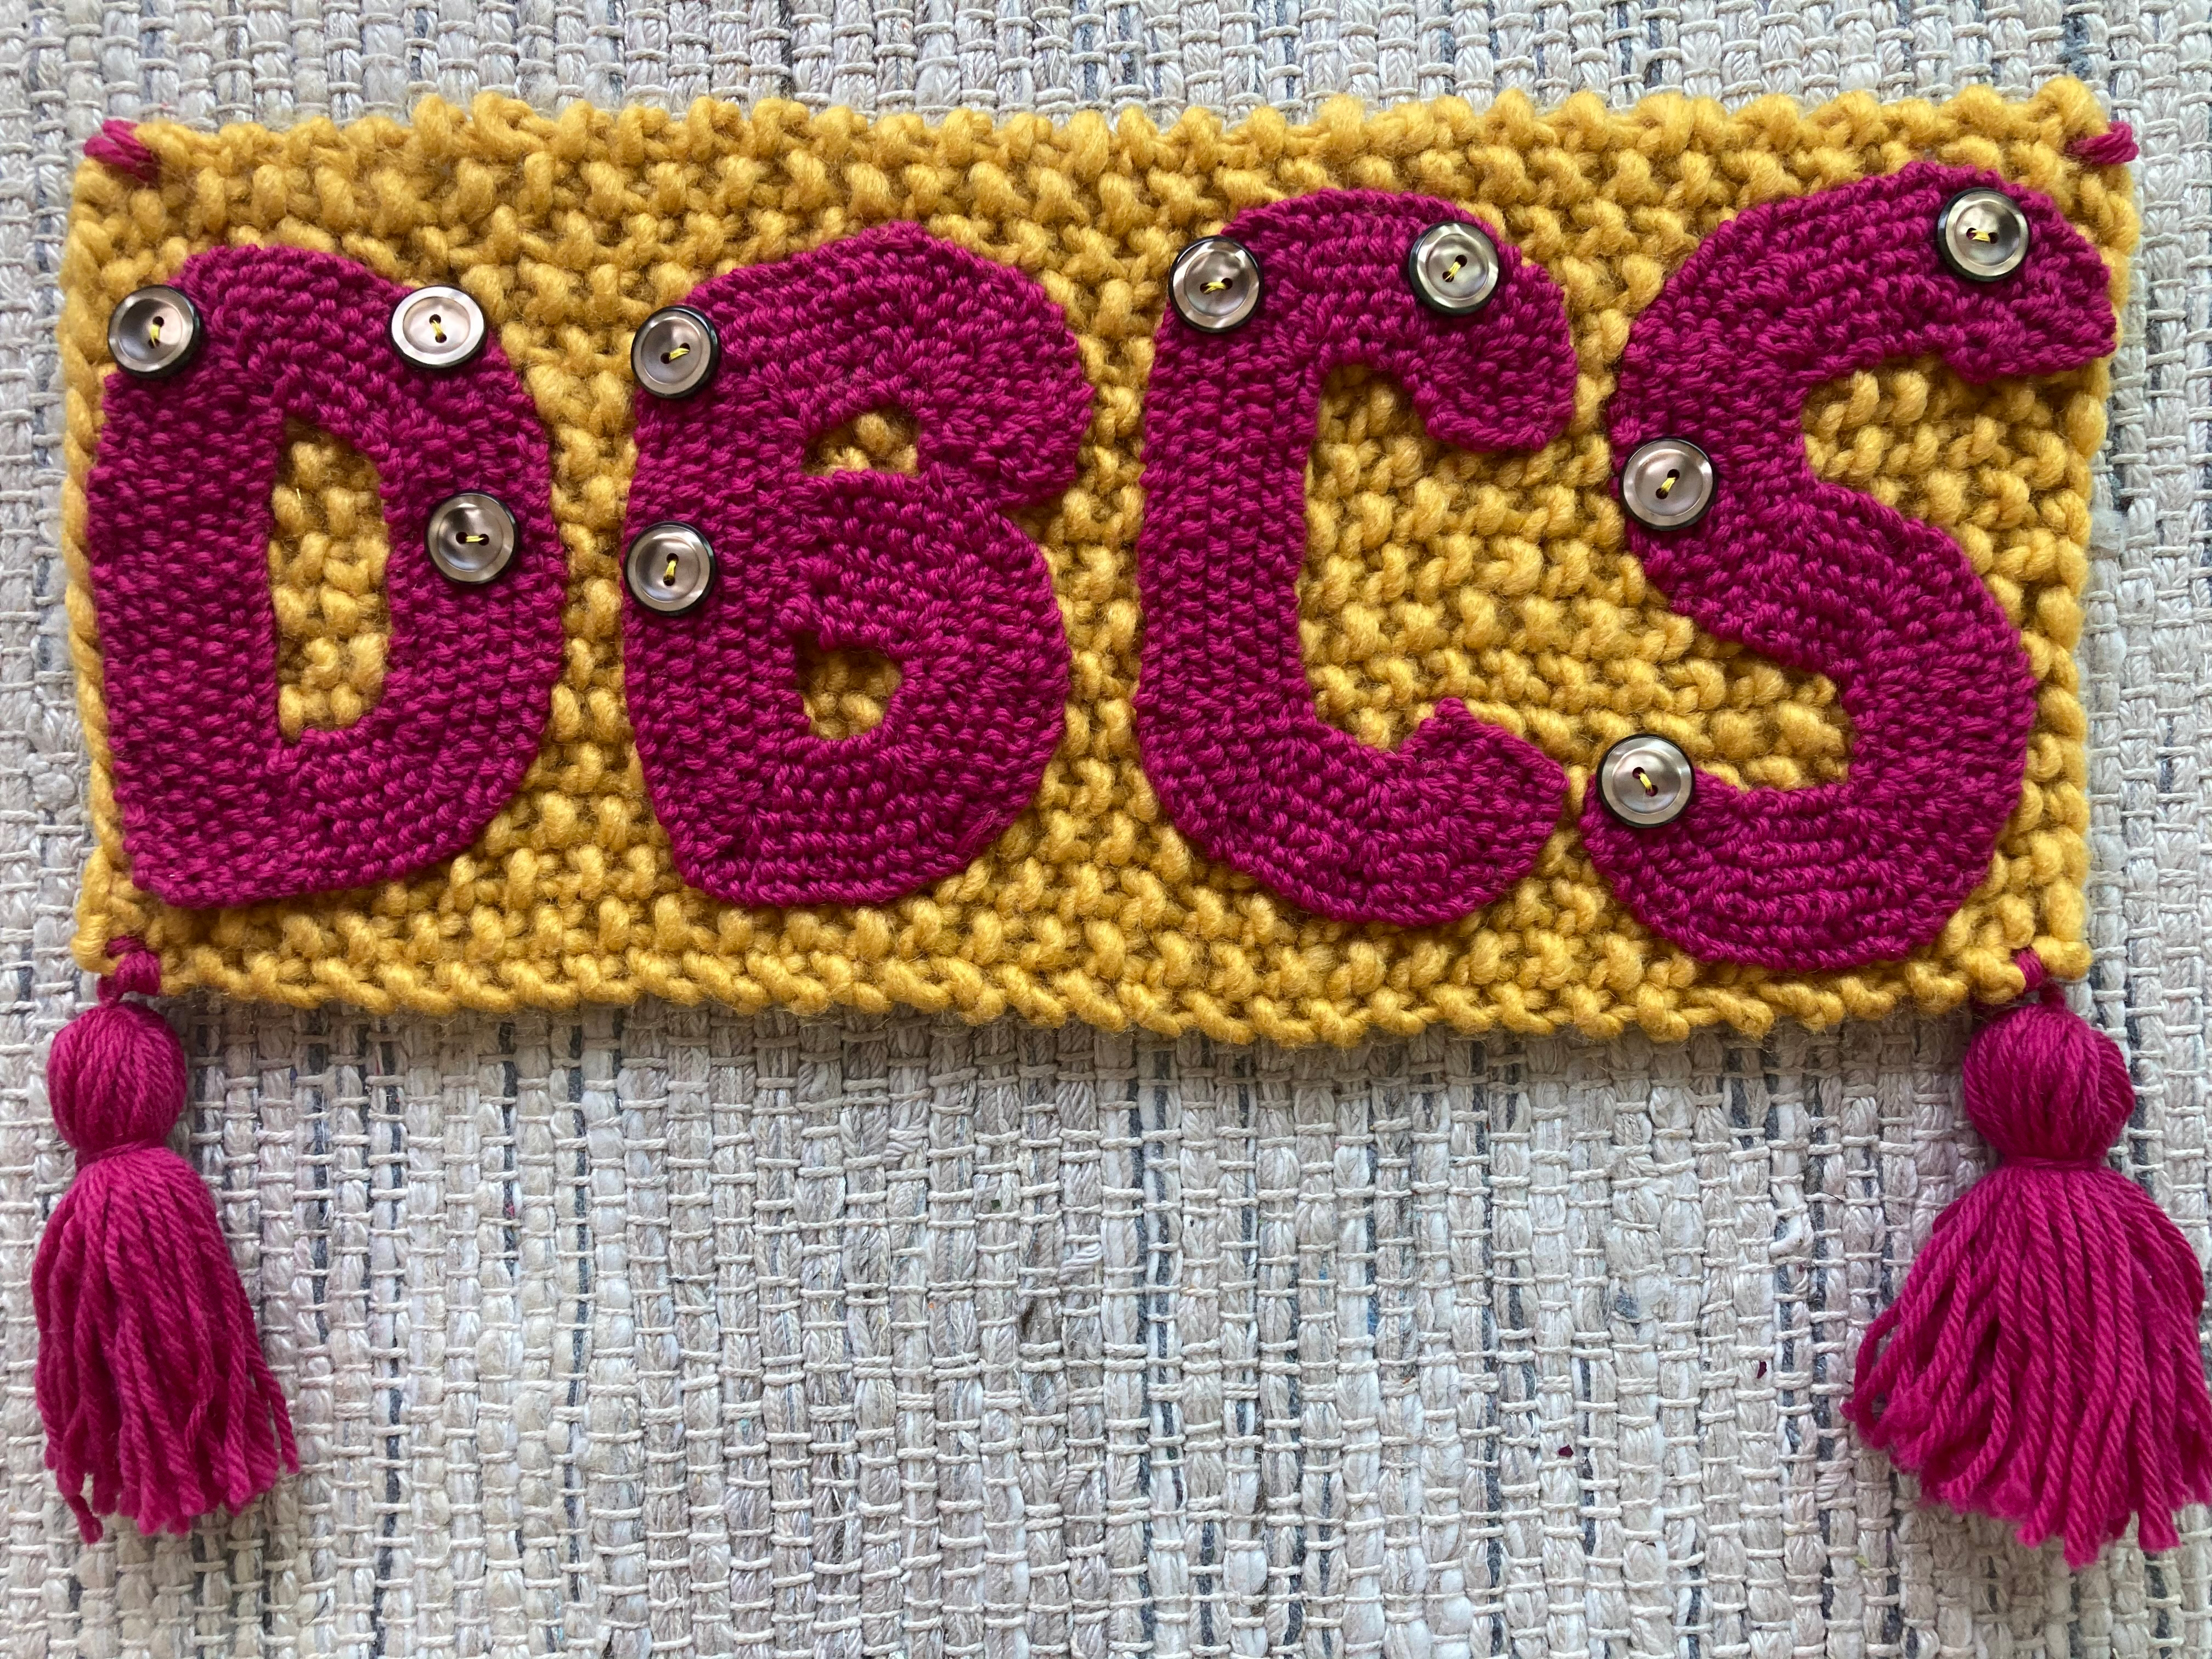 A knitted square of yarn with the text “DBCS” sewn on top. There are buttons sewn onto the letters to represent the braille for each letter.